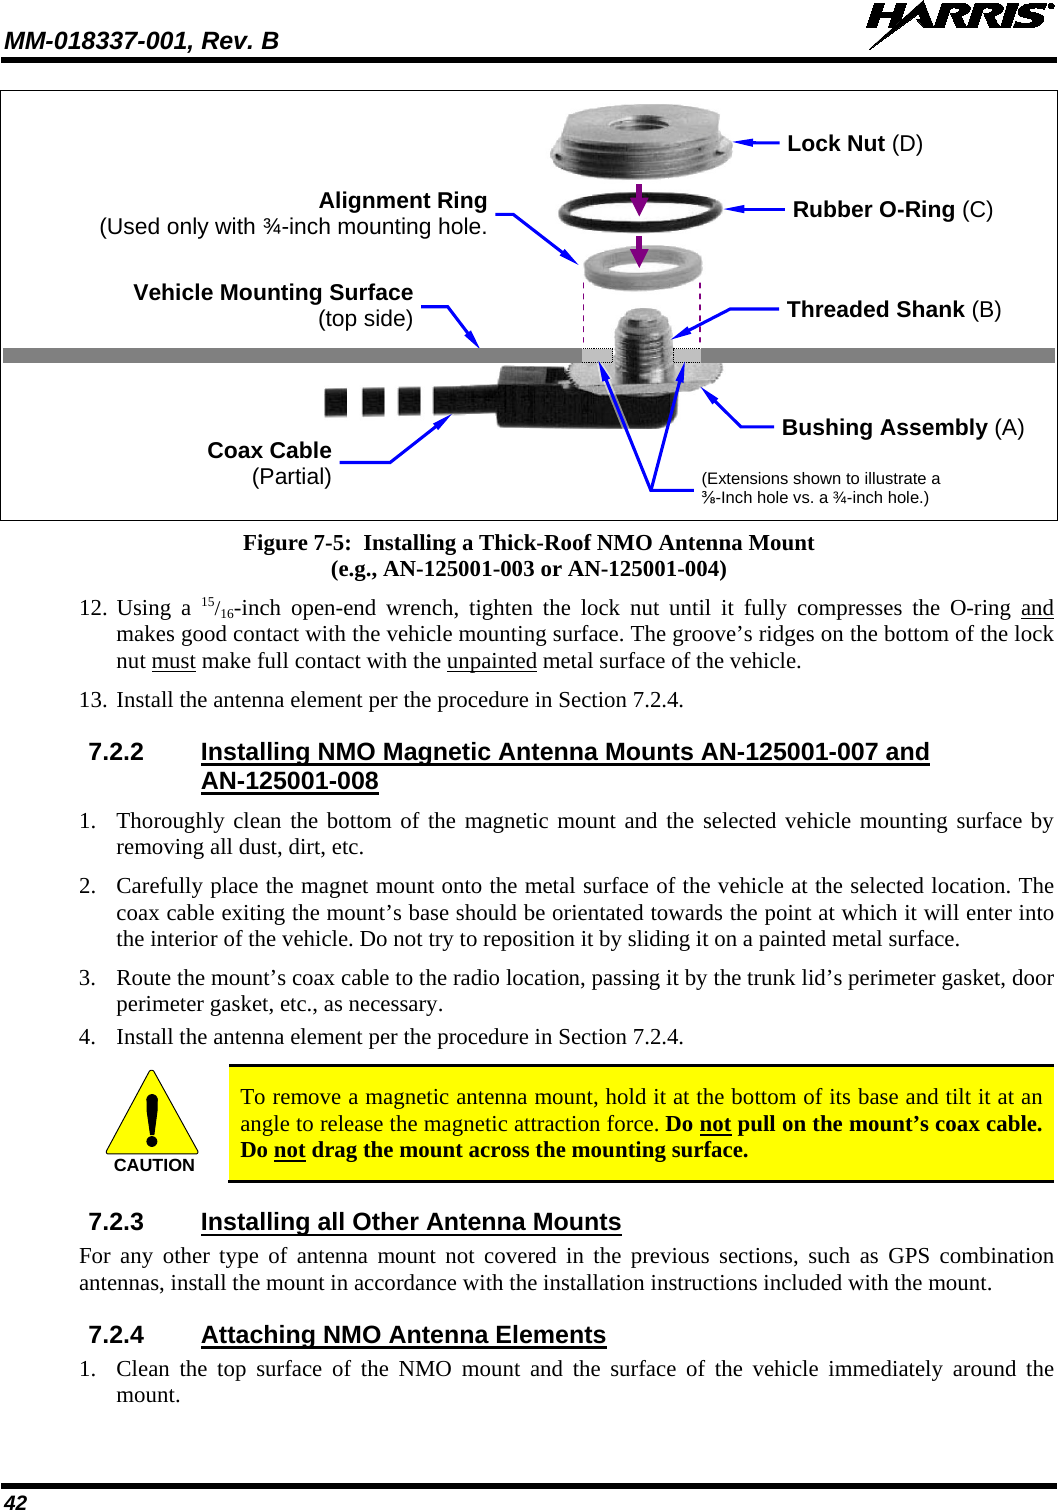 MM-018337-001, Rev. B   42     Figure 7-5:  Installing a Thick-Roof NMO Antenna Mount (e.g., AN-125001-003 or AN-125001-004) 12. Using a 15/16-inch open-end wrench, tighten the lock nut until it fully compresses the O-ring  and makes good contact with the vehicle mounting surface. The groove’s ridges on the bottom of the lock nut must make full contact with the unpainted metal surface of the vehicle. 13. Install the antenna element per the procedure in Section 7.2.4. 7.2.2 Installing NMO Magnetic Antenna Mounts AN-125001-007 and AN-125001-008 1. Thoroughly clean the bottom of the magnetic mount and the selected vehicle mounting surface by removing all dust, dirt, etc. 2. Carefully place the magnet mount onto the metal surface of the vehicle at the selected location. The coax cable exiting the mount’s base should be orientated towards the point at which it will enter into the interior of the vehicle. Do not try to reposition it by sliding it on a painted metal surface. 3. Route the mount’s coax cable to the radio location, passing it by the trunk lid’s perimeter gasket, door perimeter gasket, etc., as necessary. 4. Install the antenna element per the procedure in Section 7.2.4.  CAUTION To remove a magnetic antenna mount, hold it at the bottom of its base and tilt it at an angle to release the magnetic attraction force. Do not pull on the mount’s coax cable. Do not drag the mount across the mounting surface. 7.2.3 Installing all Other Antenna Mounts For any other type of antenna mount not covered in the previous sections, such as GPS combination antennas, install the mount in accordance with the installation instructions included with the mount. 7.2.4 Attaching NMO Antenna Elements 1. Clean the top surface of the NMO mount and the surface of the vehicle immediately around the mount. Coax Cable (Partial) Rubber O-Ring (C) Vehicle Mounting Surface (top side) Bushing Assembly (A) Lock Nut (D) Threaded Shank (B) Alignment Ring (Used only with ¾-inch mounting hole. (Extensions shown to illustrate a ⅜-Inch hole vs. a ¾-inch hole.)  